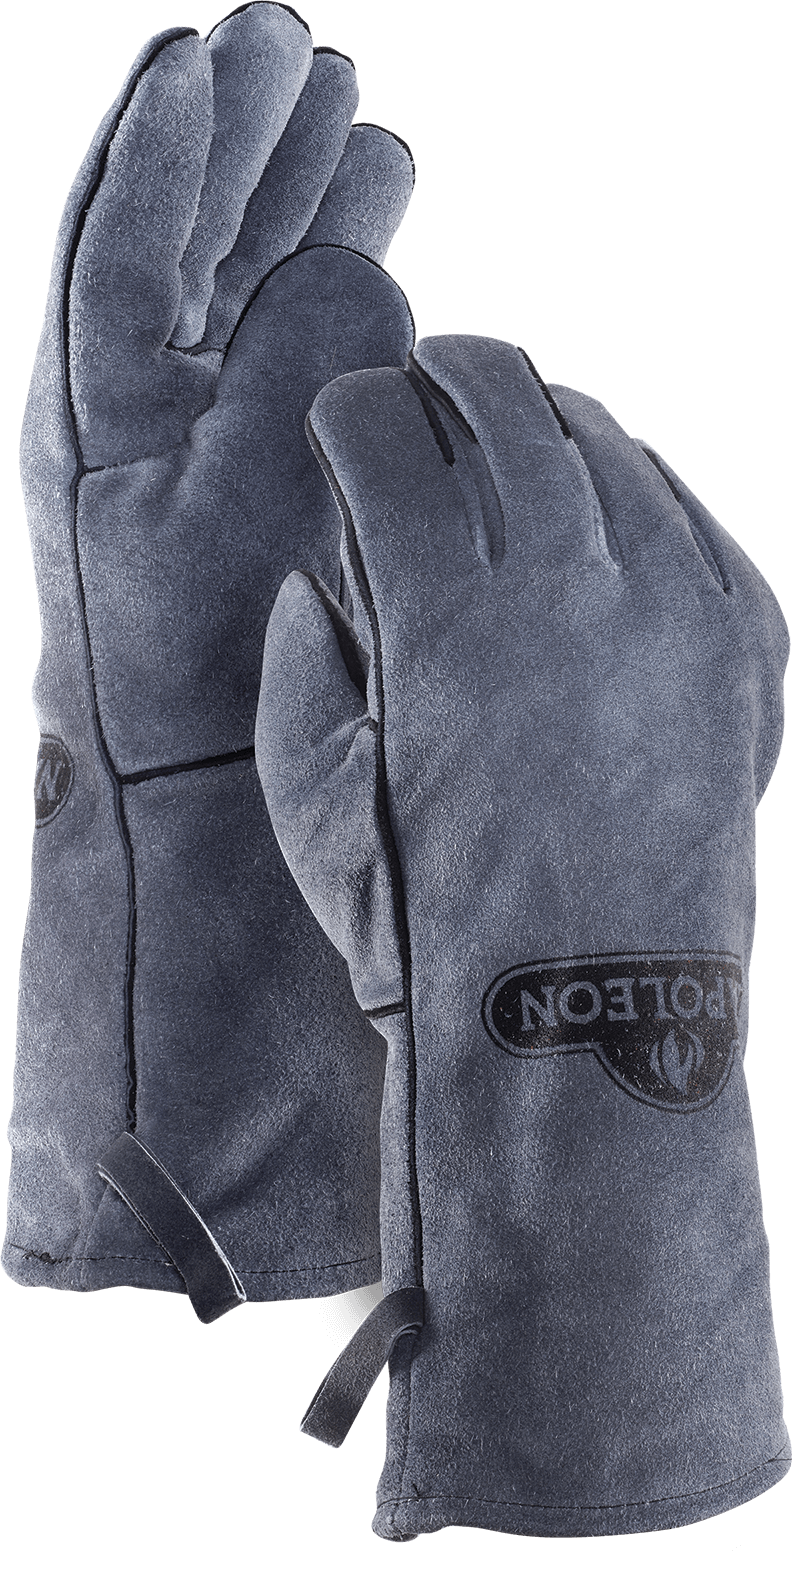 NAPOLEON GENUINE LEATHER BBQ GLOVES - Watson Brothers Patio and Hearth